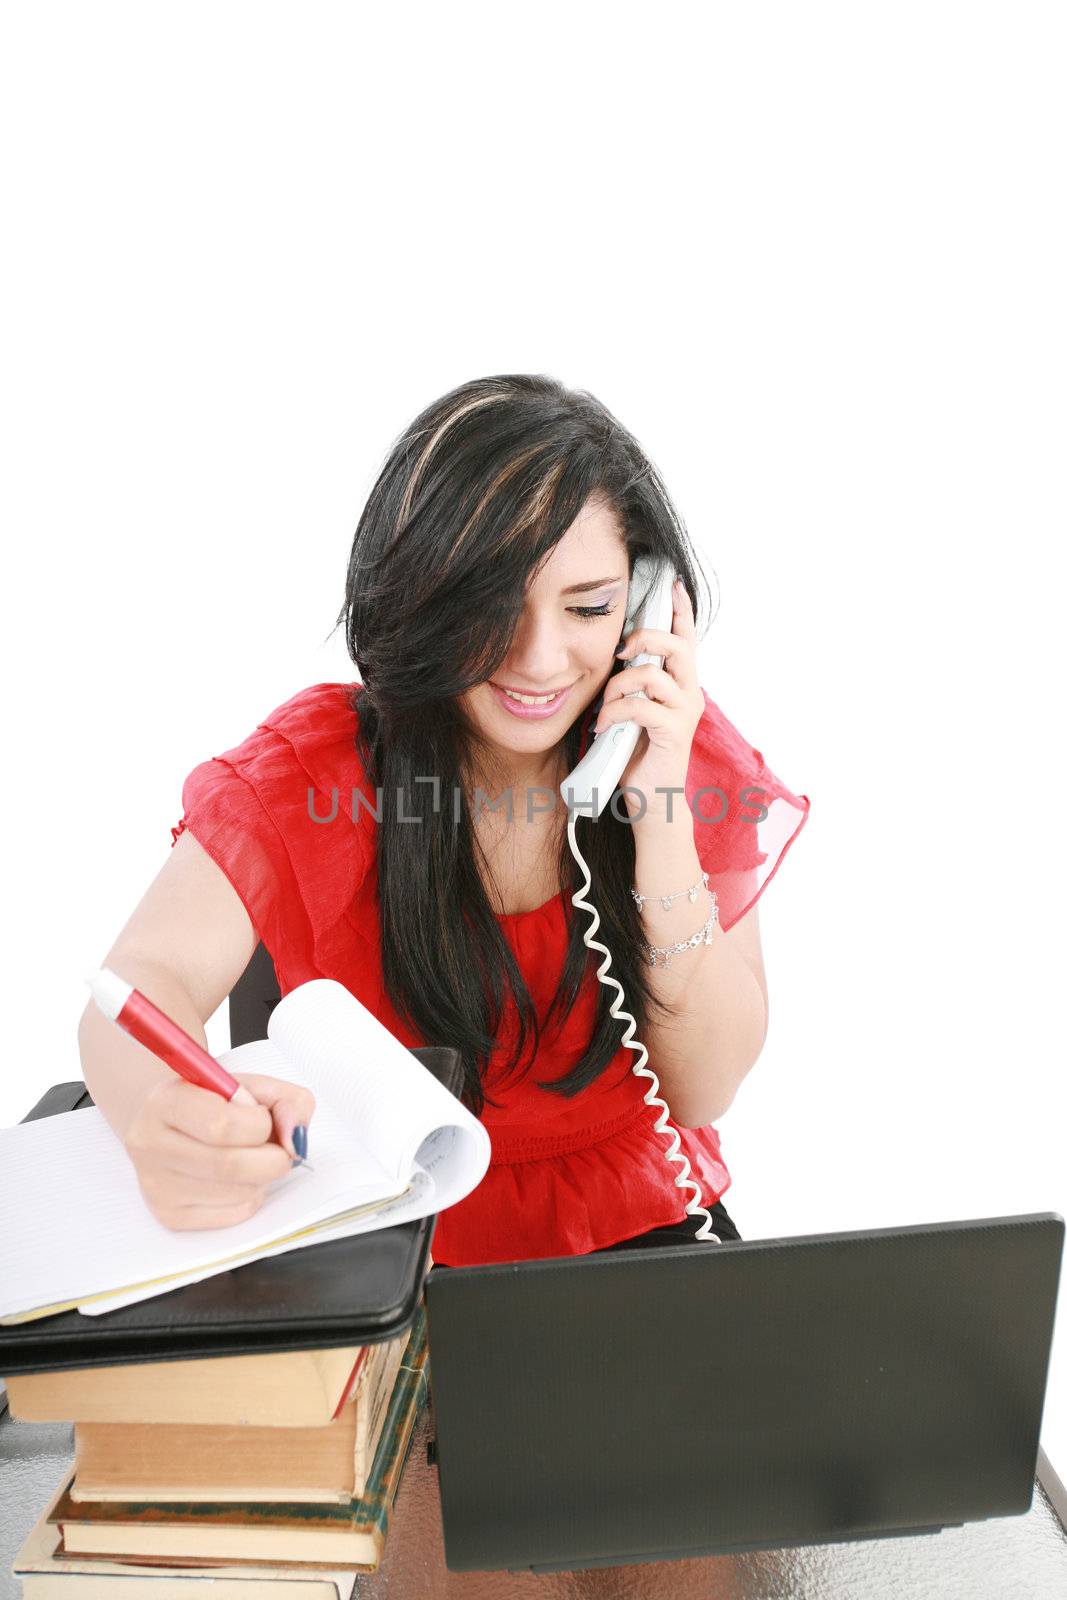 Smiling young business woman on phone taking notes in office by dacasdo